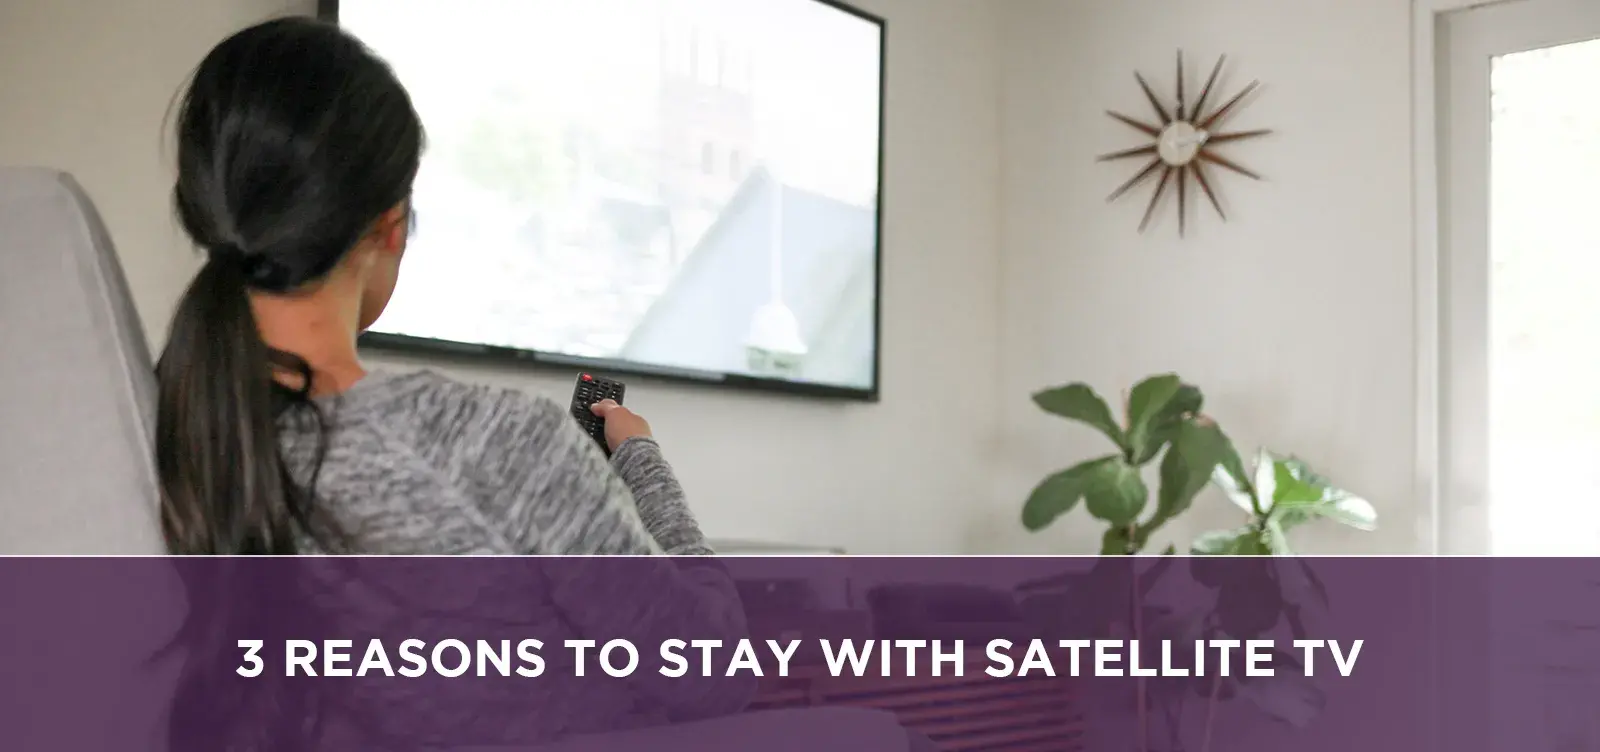 3 Reasons to Stay With Satellite TV